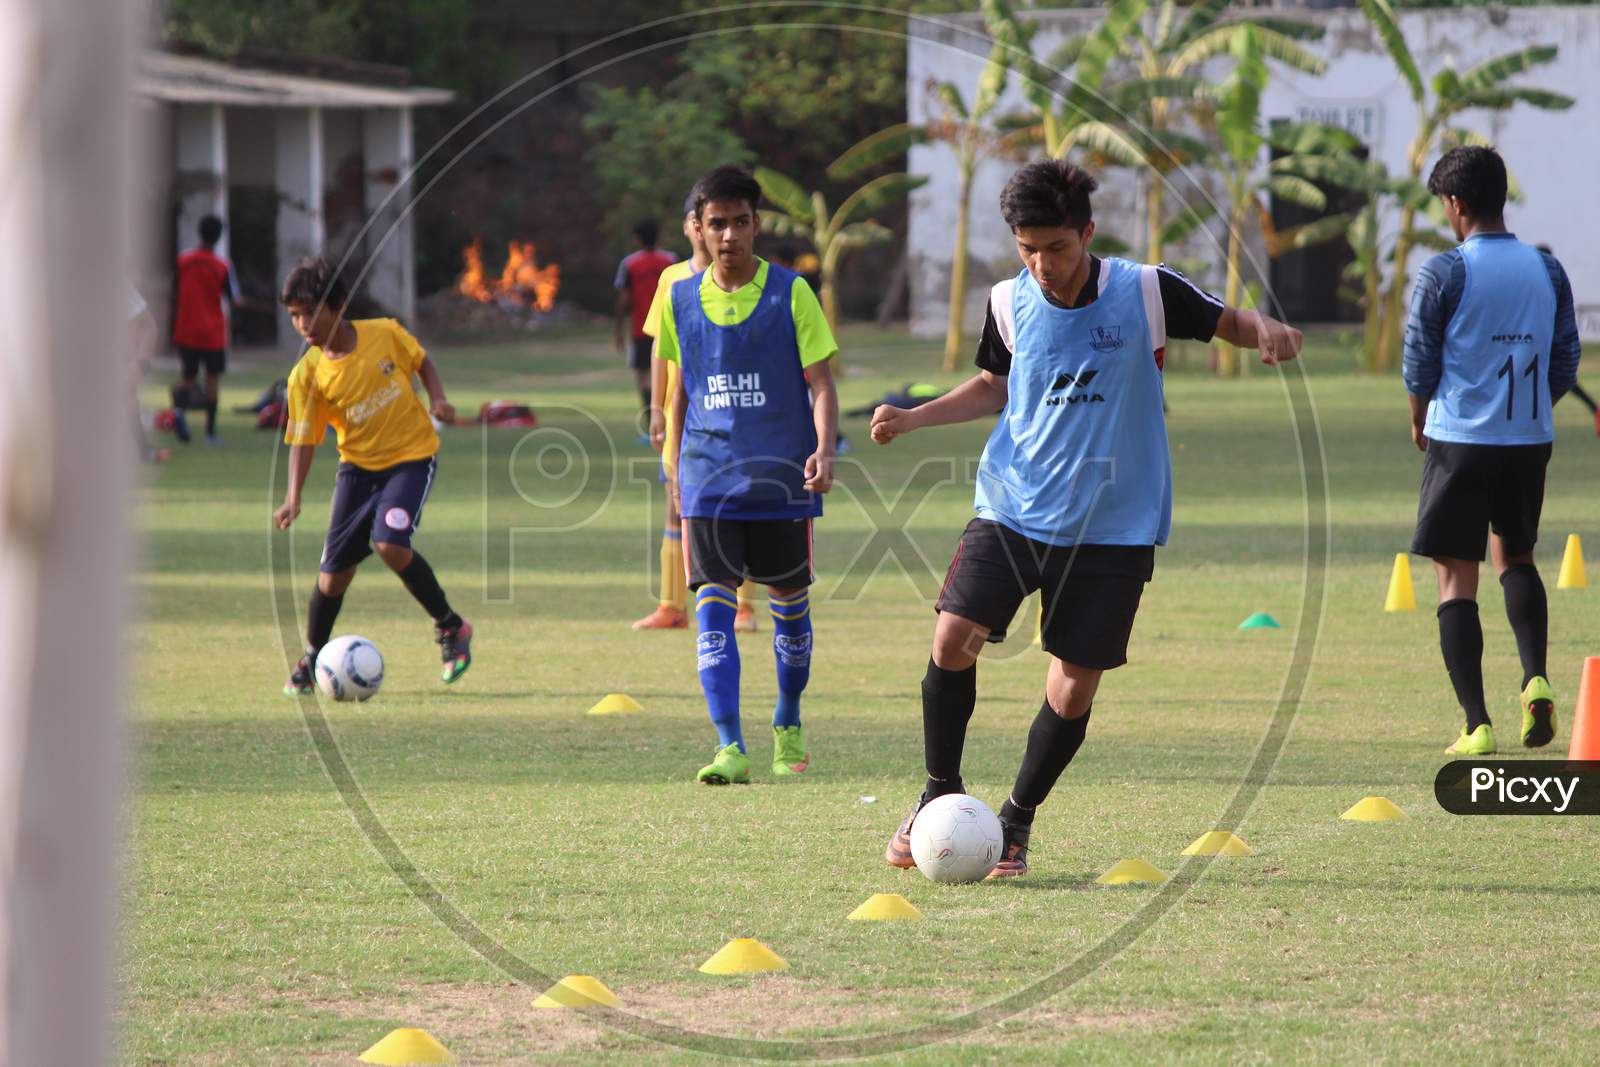 New Delhi, Delhi/ India- June 15 2020: Young Boys Playing Football In The Green Fields, After The Lockdown Gets Over In New Delhi.